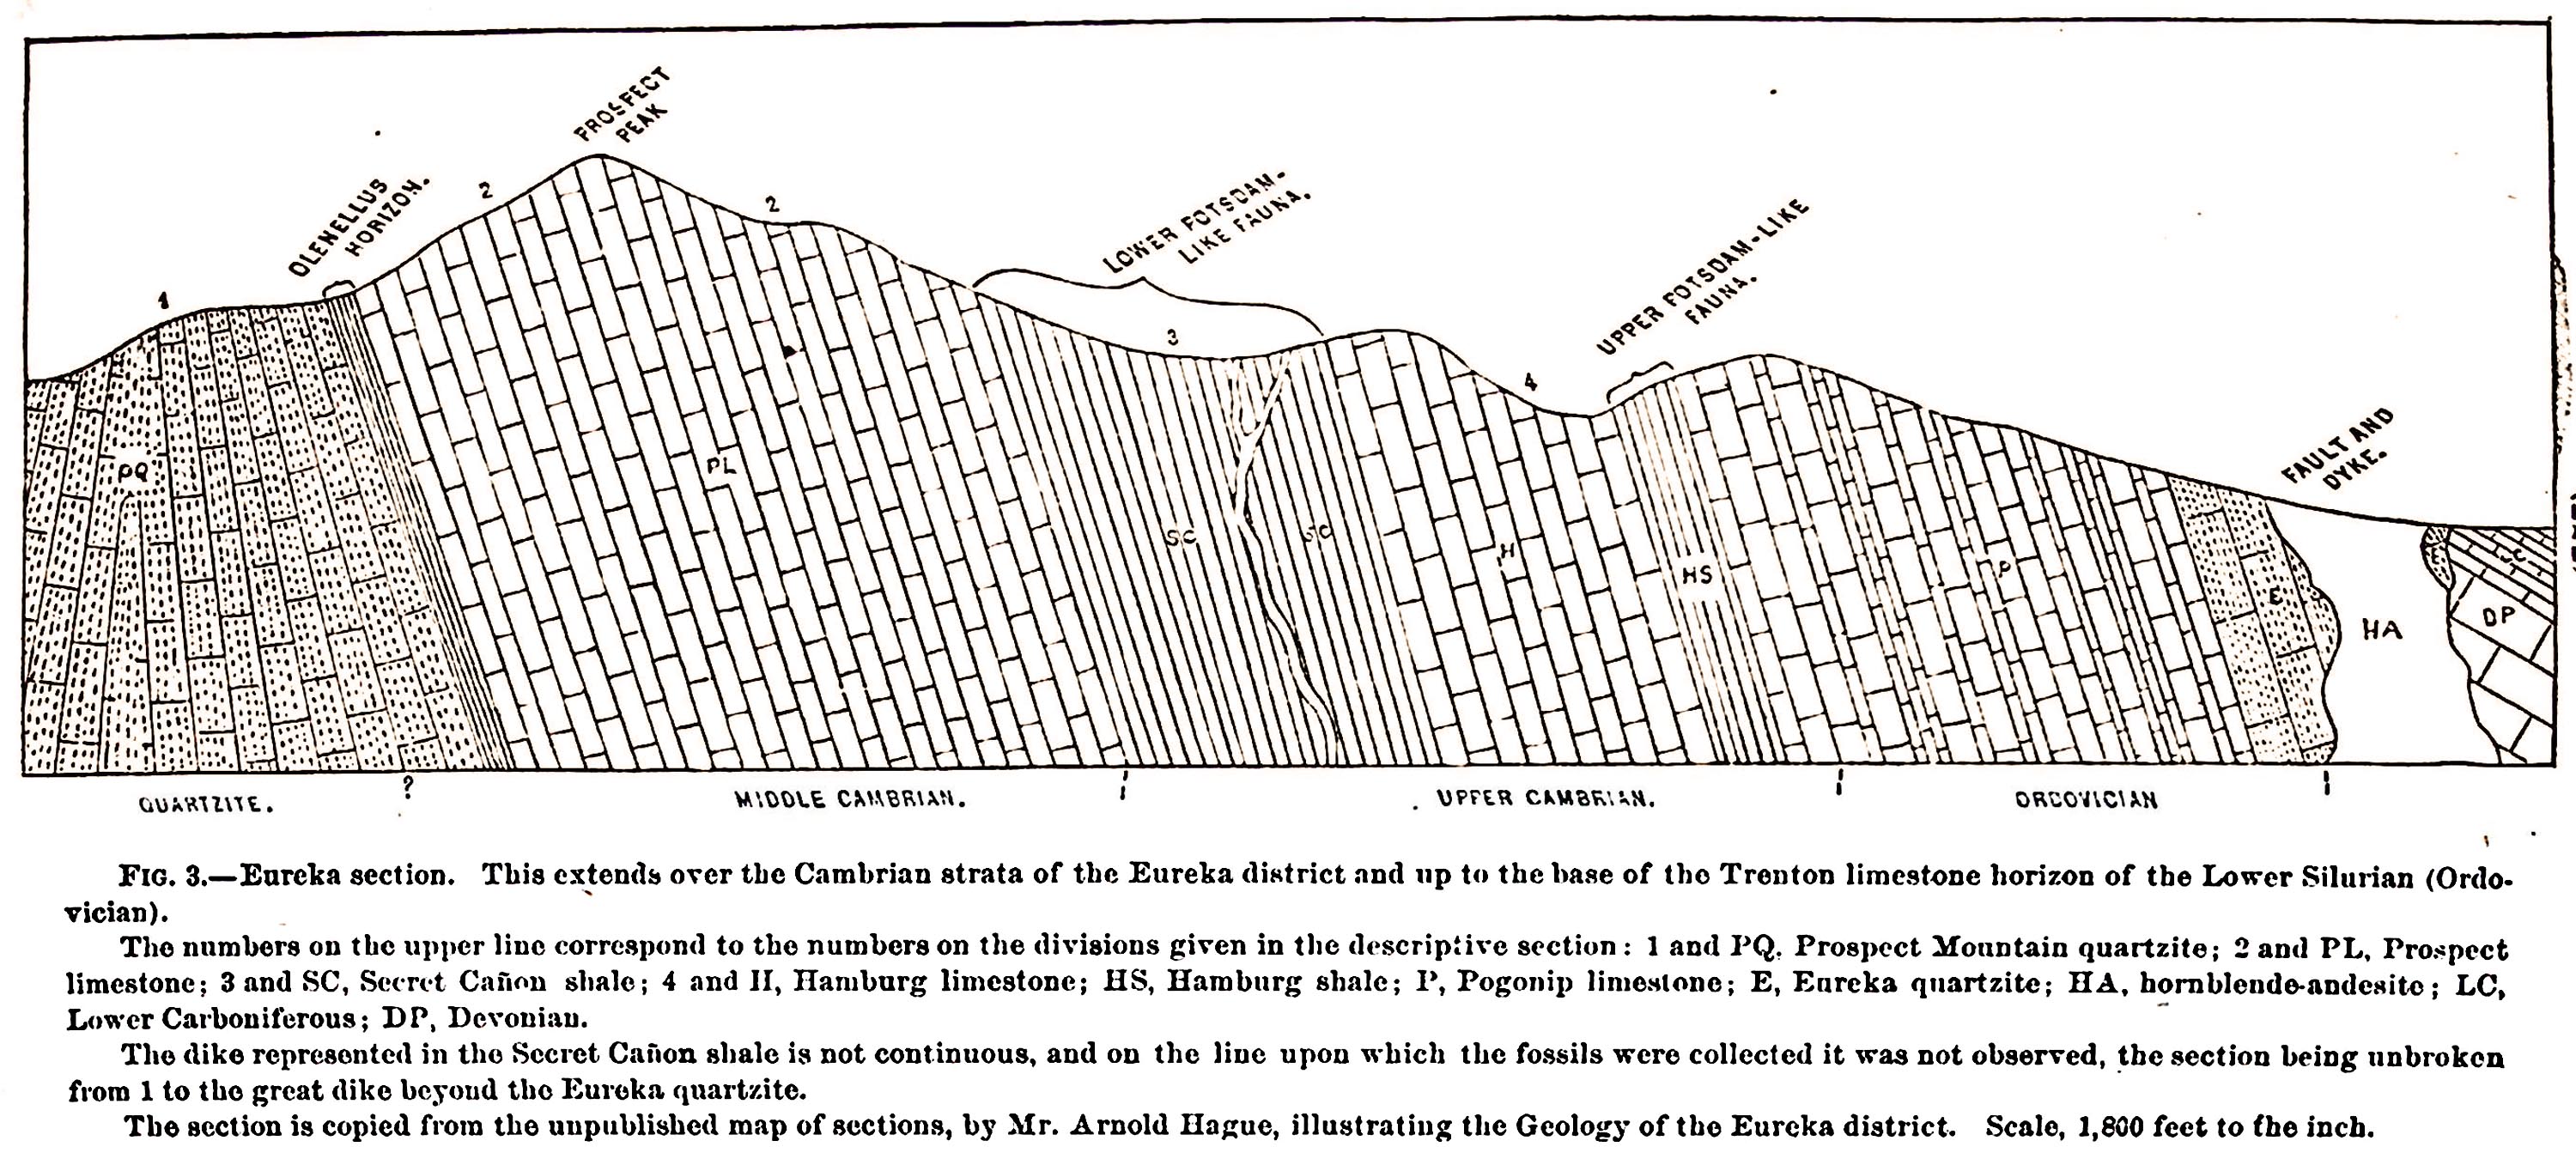 Section p.031